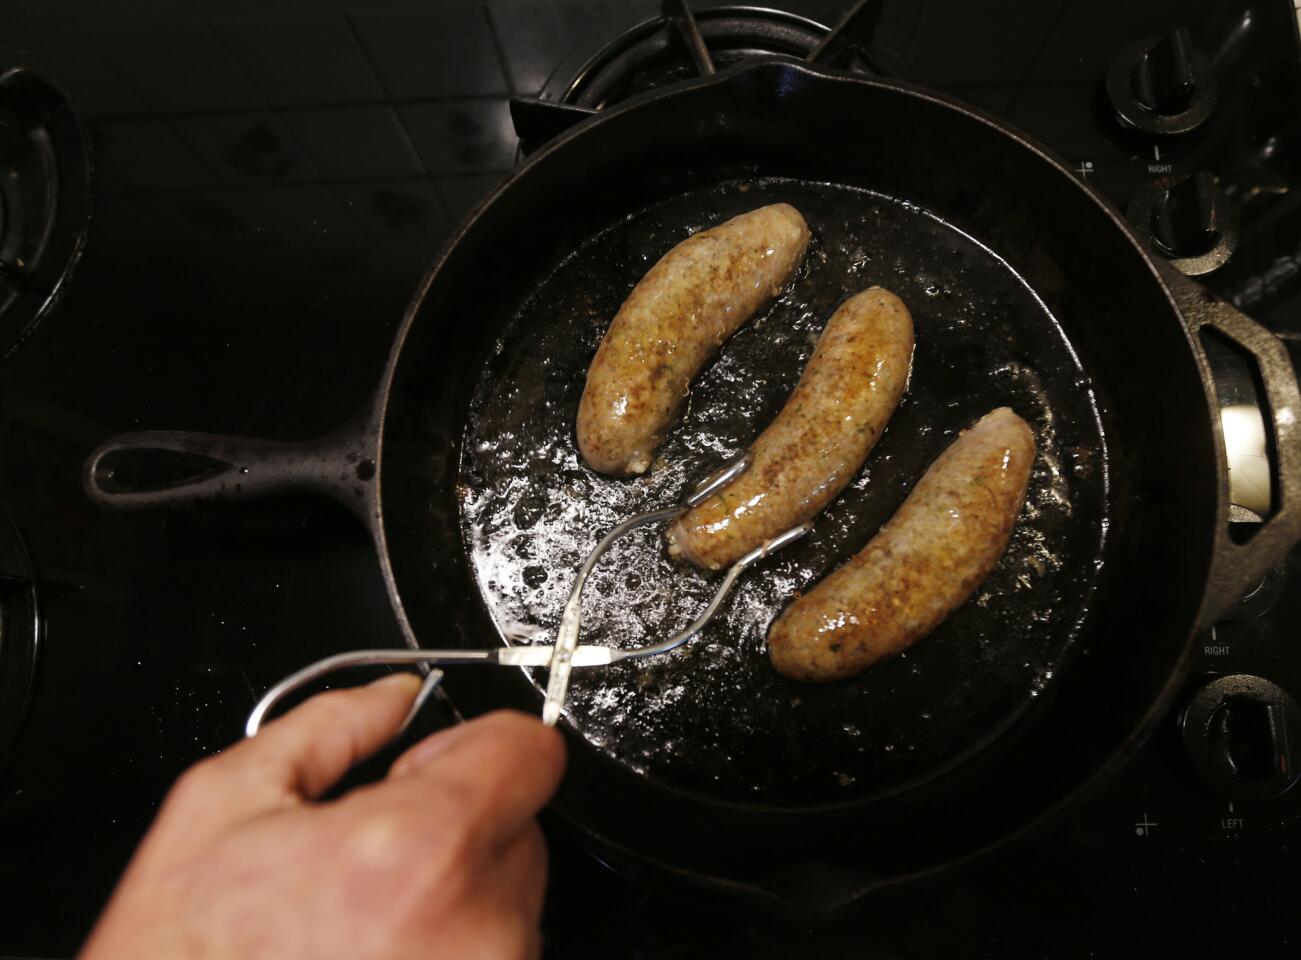 Links of Billy's Boudin are fried in a cast iron skillet in River Ridge, La., Tuesday, Jan. 26, 2016. Boudin is a tradition that dates back to the 1700s, when French Canadians came to Louisiana. Robert Carriker, a professor of history at the University of Louisiana in Lafayette, says Cajuns started using local ingredients and spices to make sausages that are different from Old World recipes. (AP Photo/Gerald Herbert)